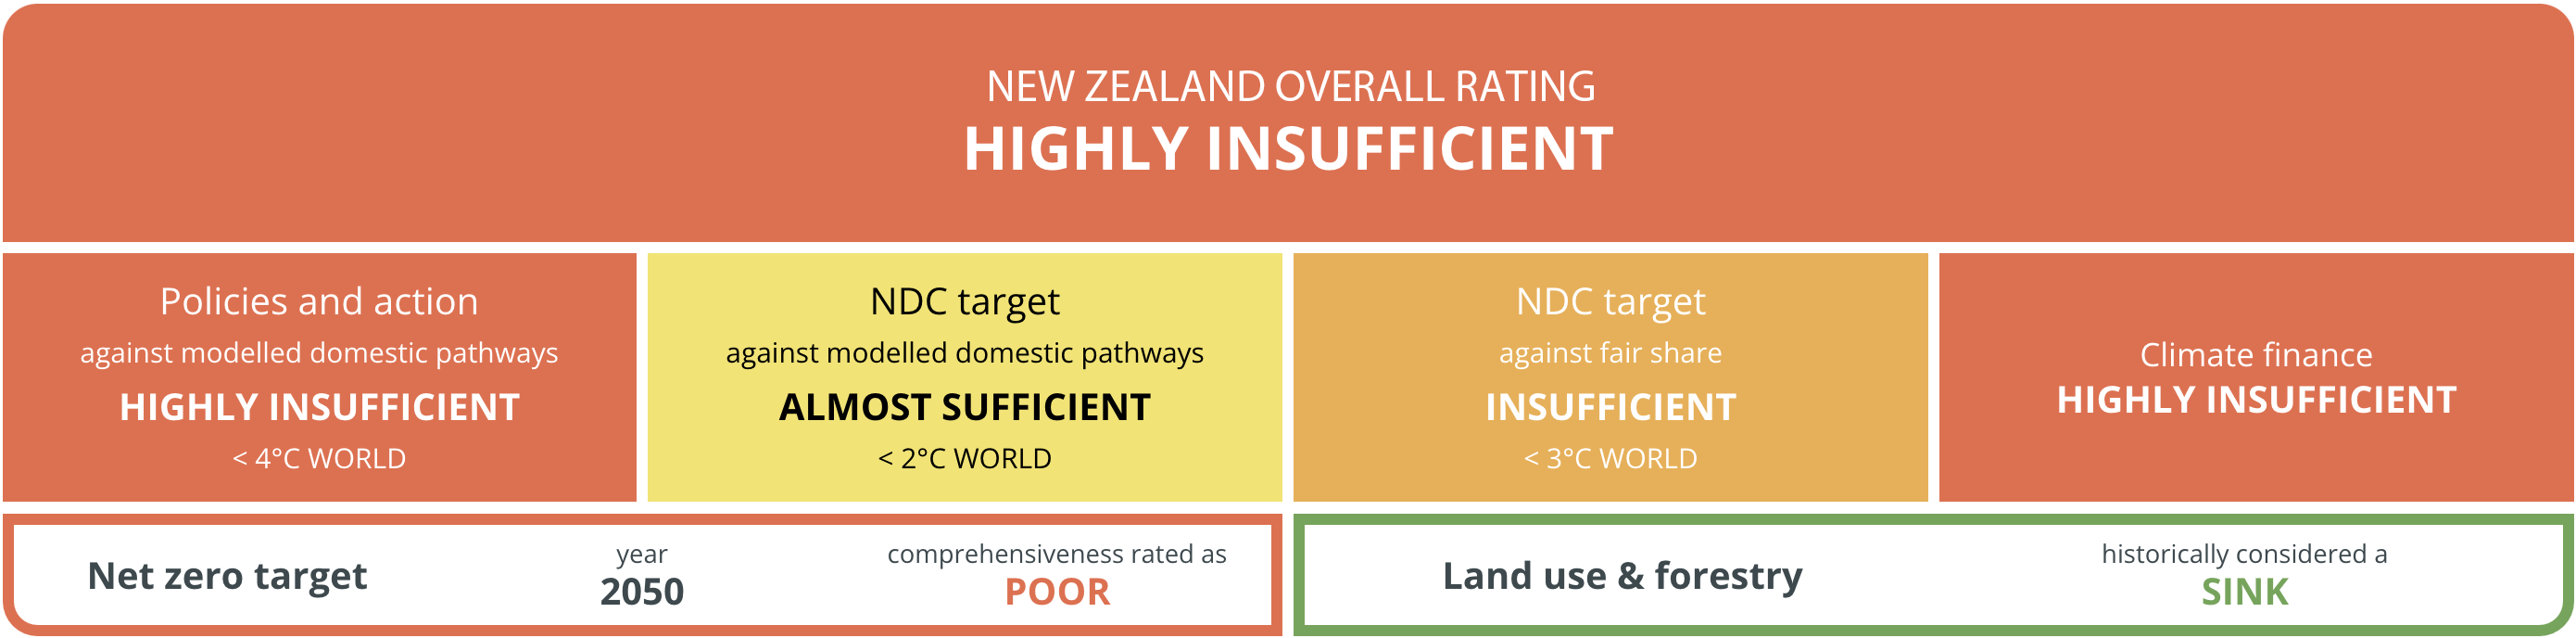 climate-tracker_nz_ratings